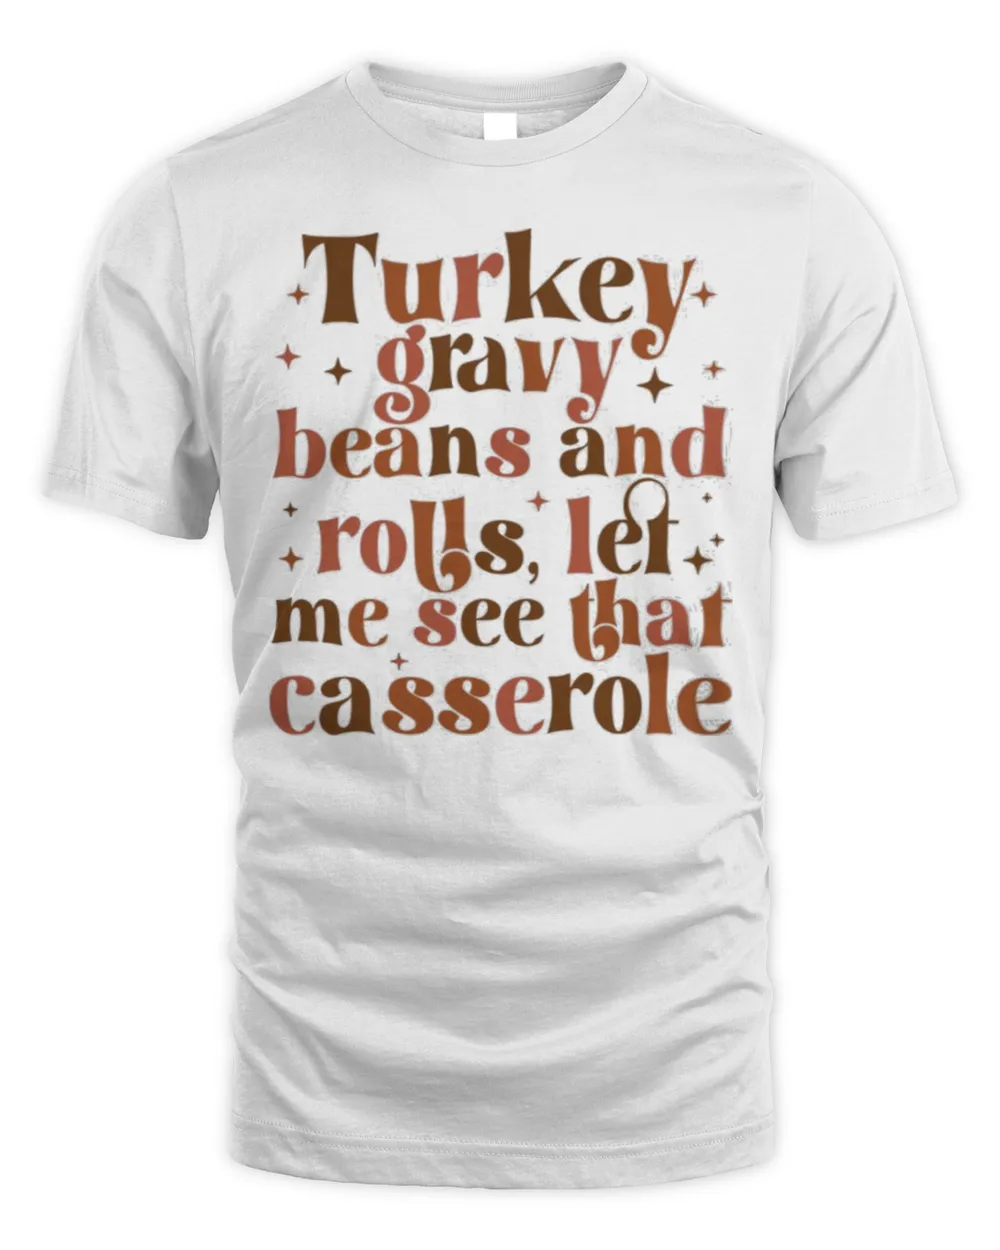 Turkey gravy beans and rolls let me see that casserole shirt